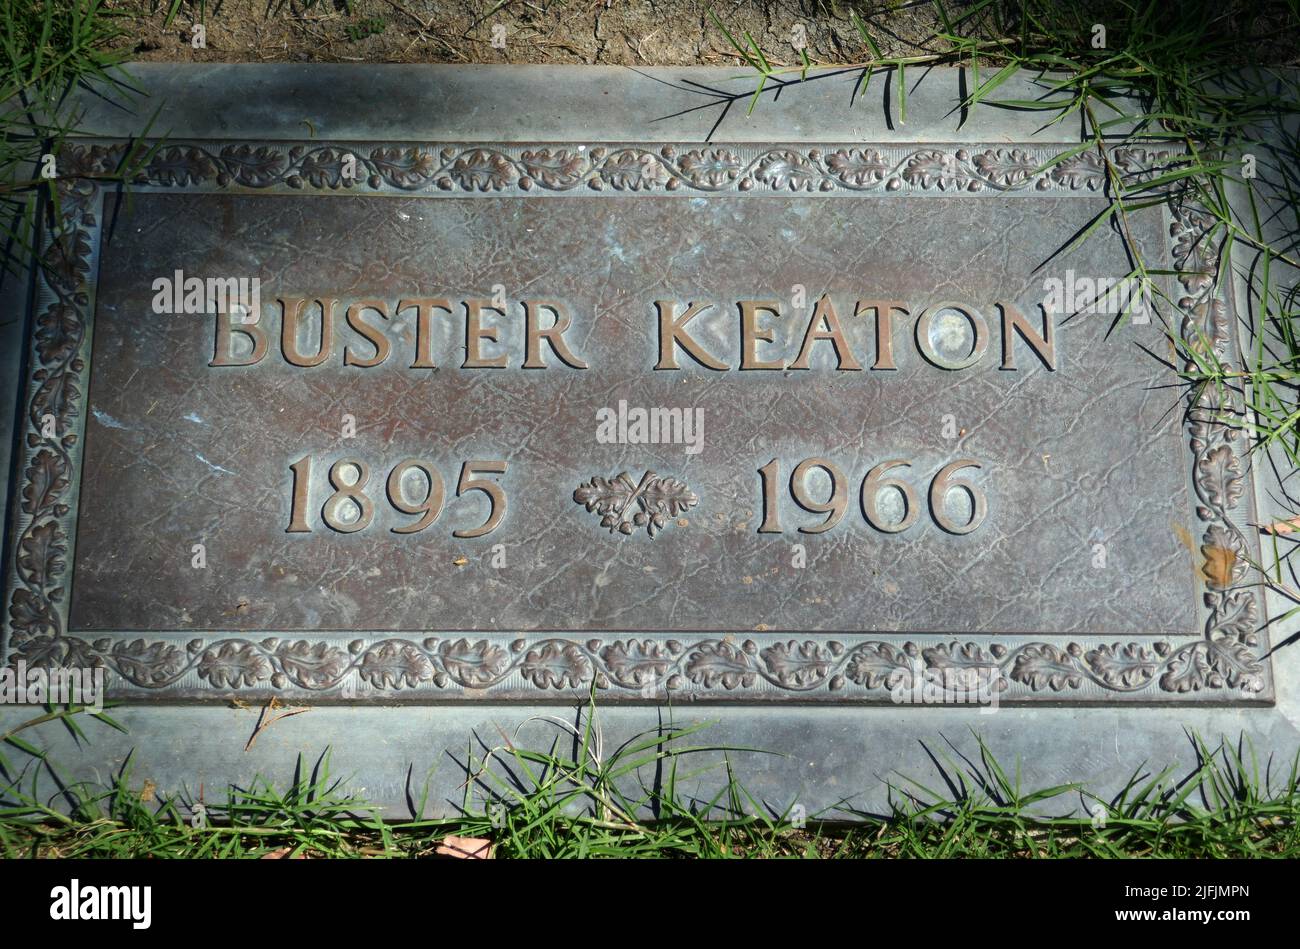 Los Angeles, California, USA 19th June 2022 Actor Buster Keaton's Grave in Court of Valor Section at Forest Lawn Memorial Park Hollywood Hills on June 19, 2022 in Los Angeles, California, USA. Photo by Barry King/Alamy Stock Photo Stock Photo